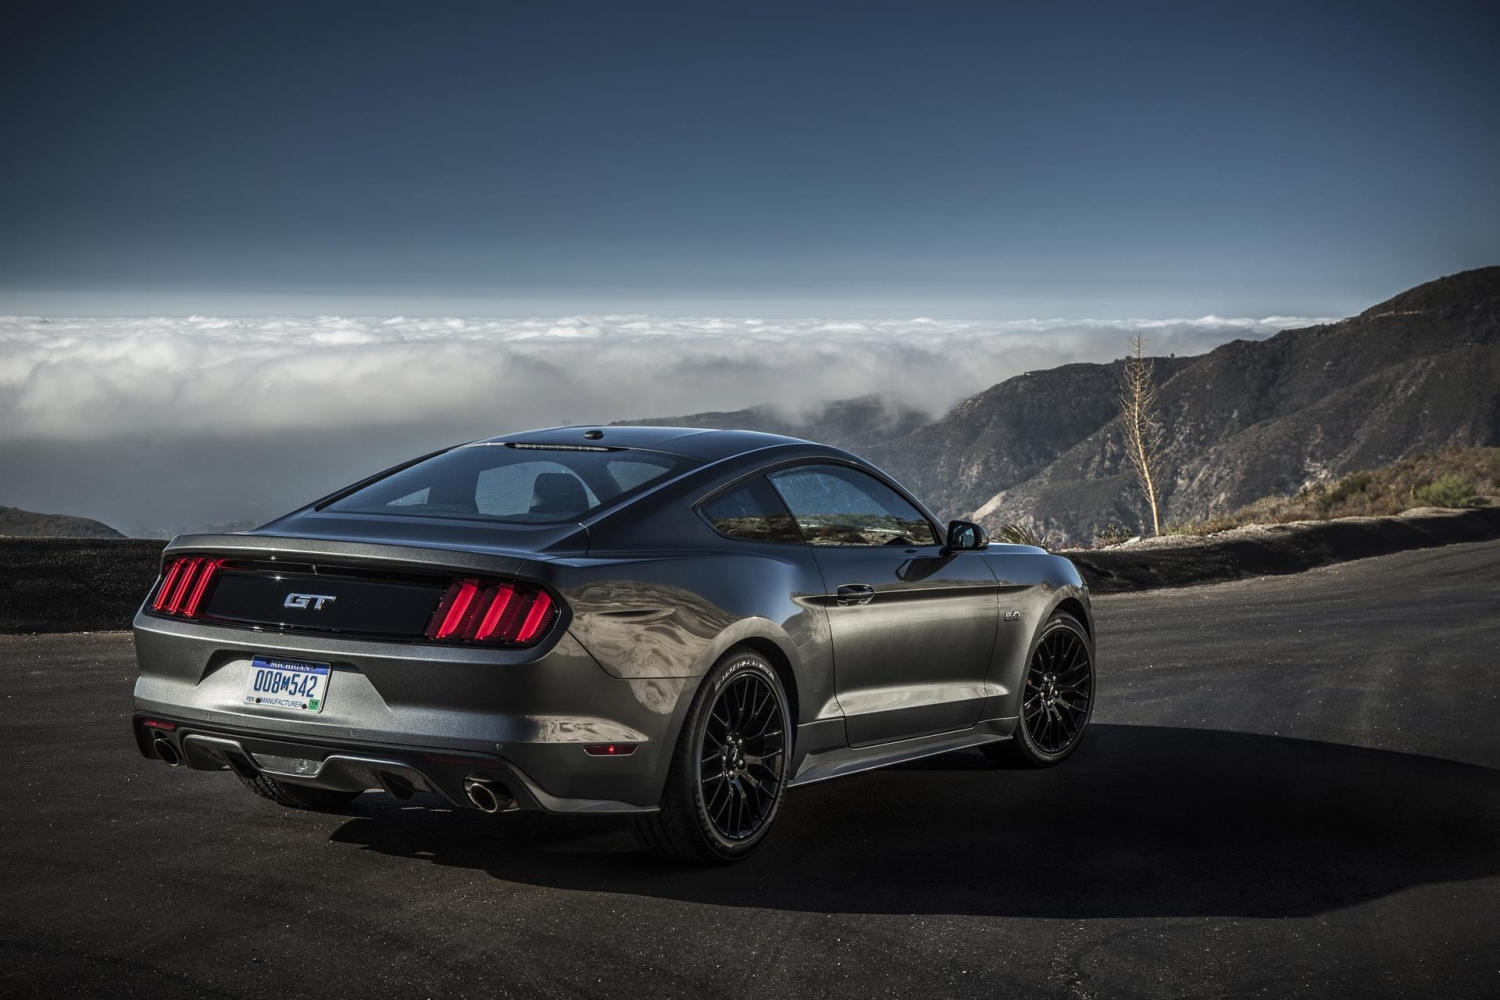 2015 Ford Mustang Wallpapers